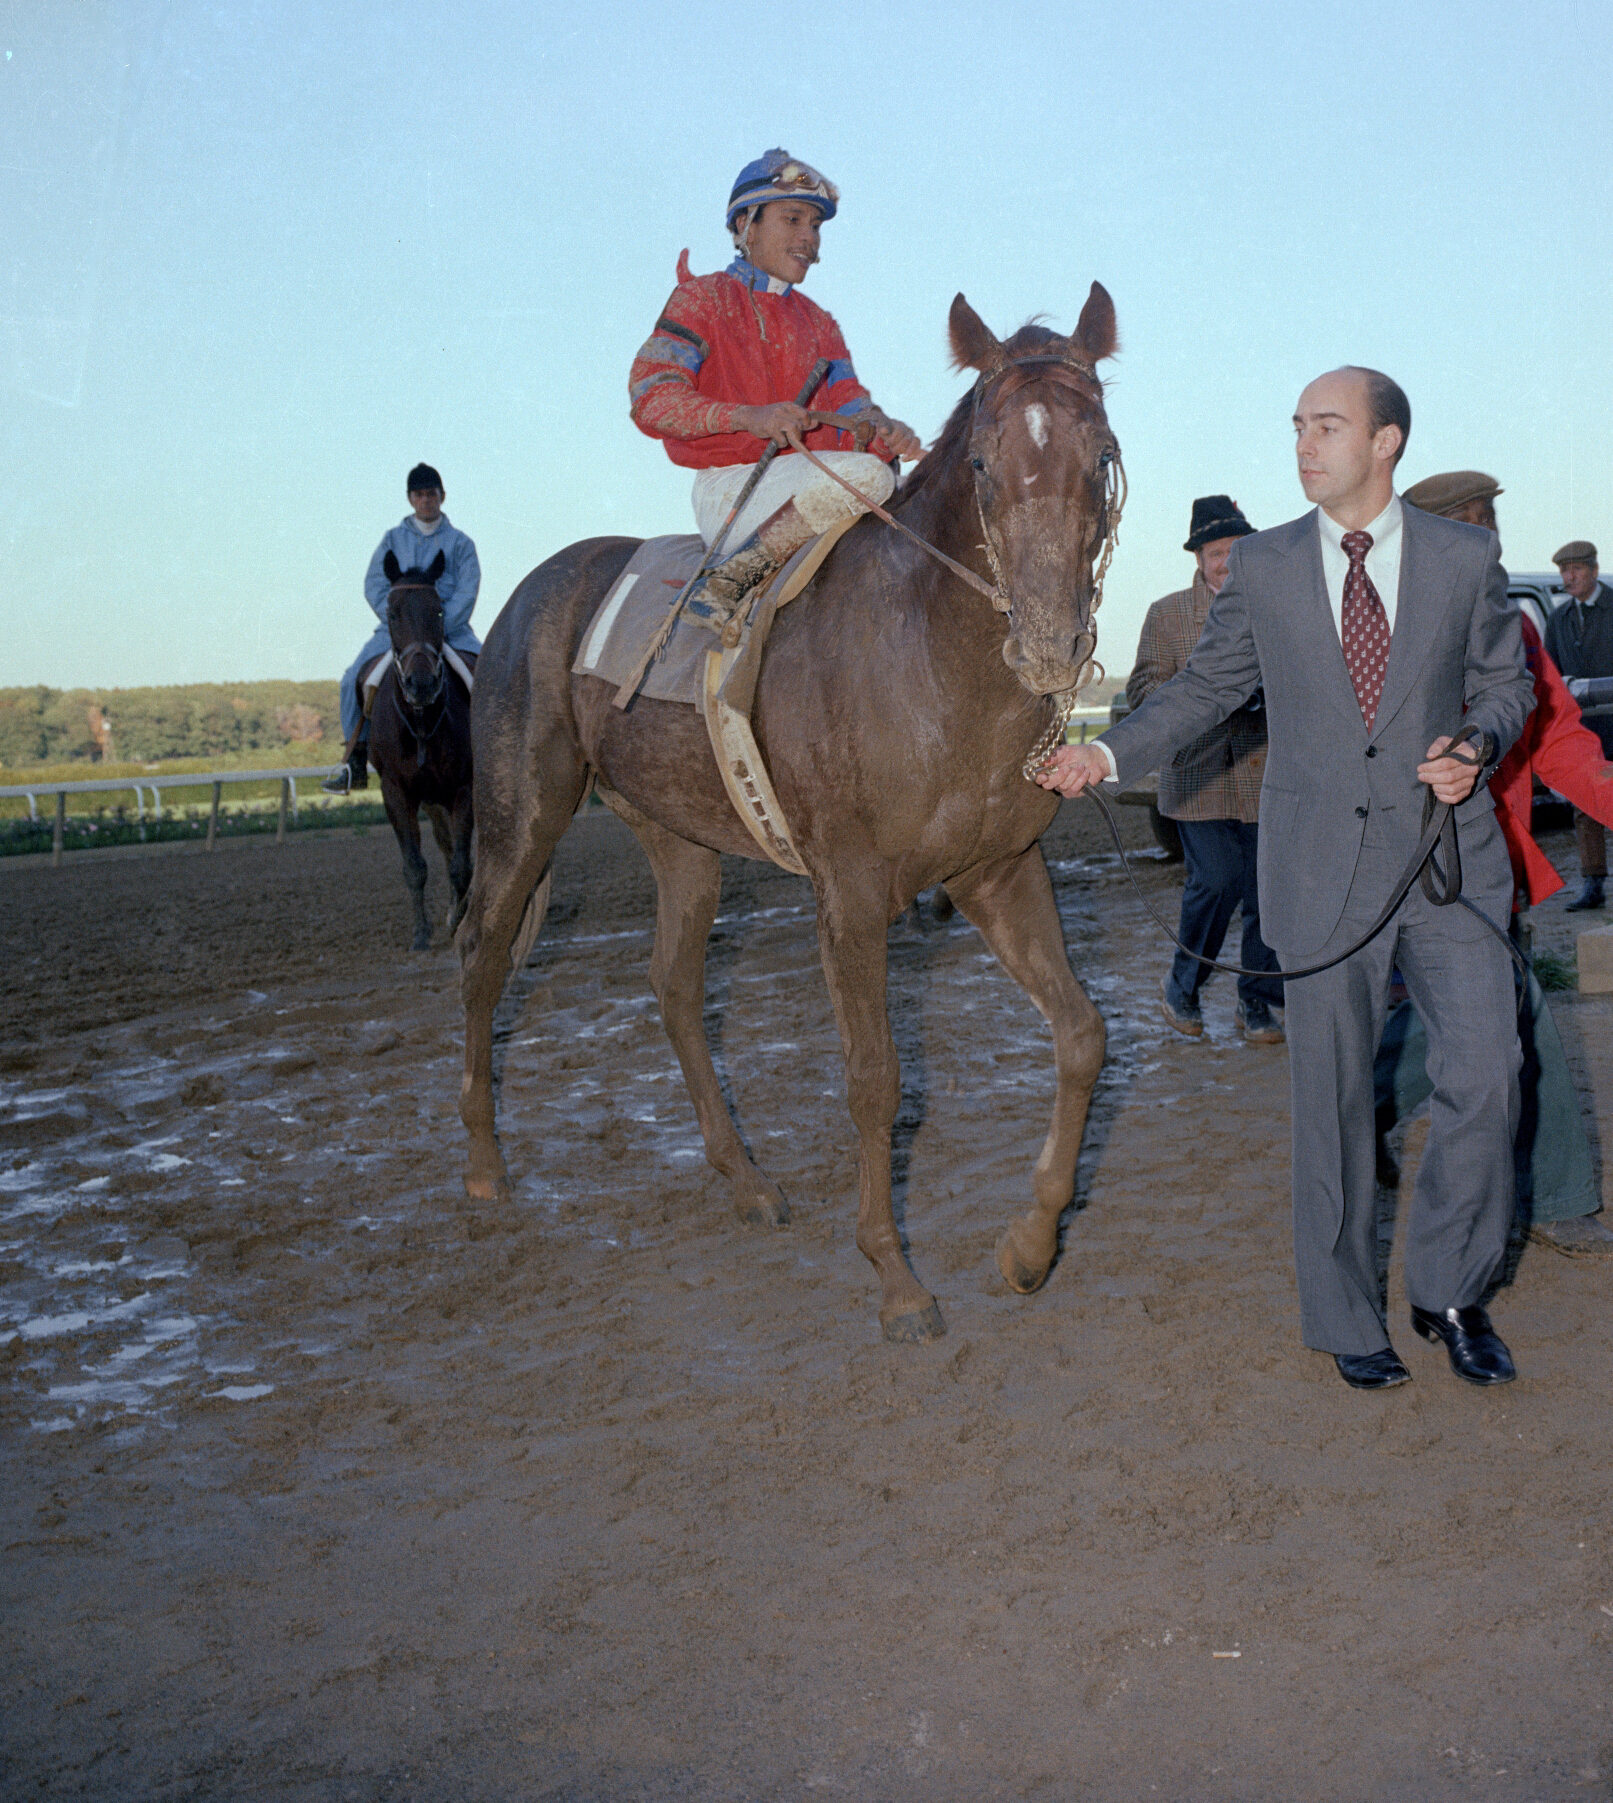 A muddy Alydar after winning the Champagne Stakes being led from the track by trainer John Veitch. Photo courtesy of Bob Conglianese.